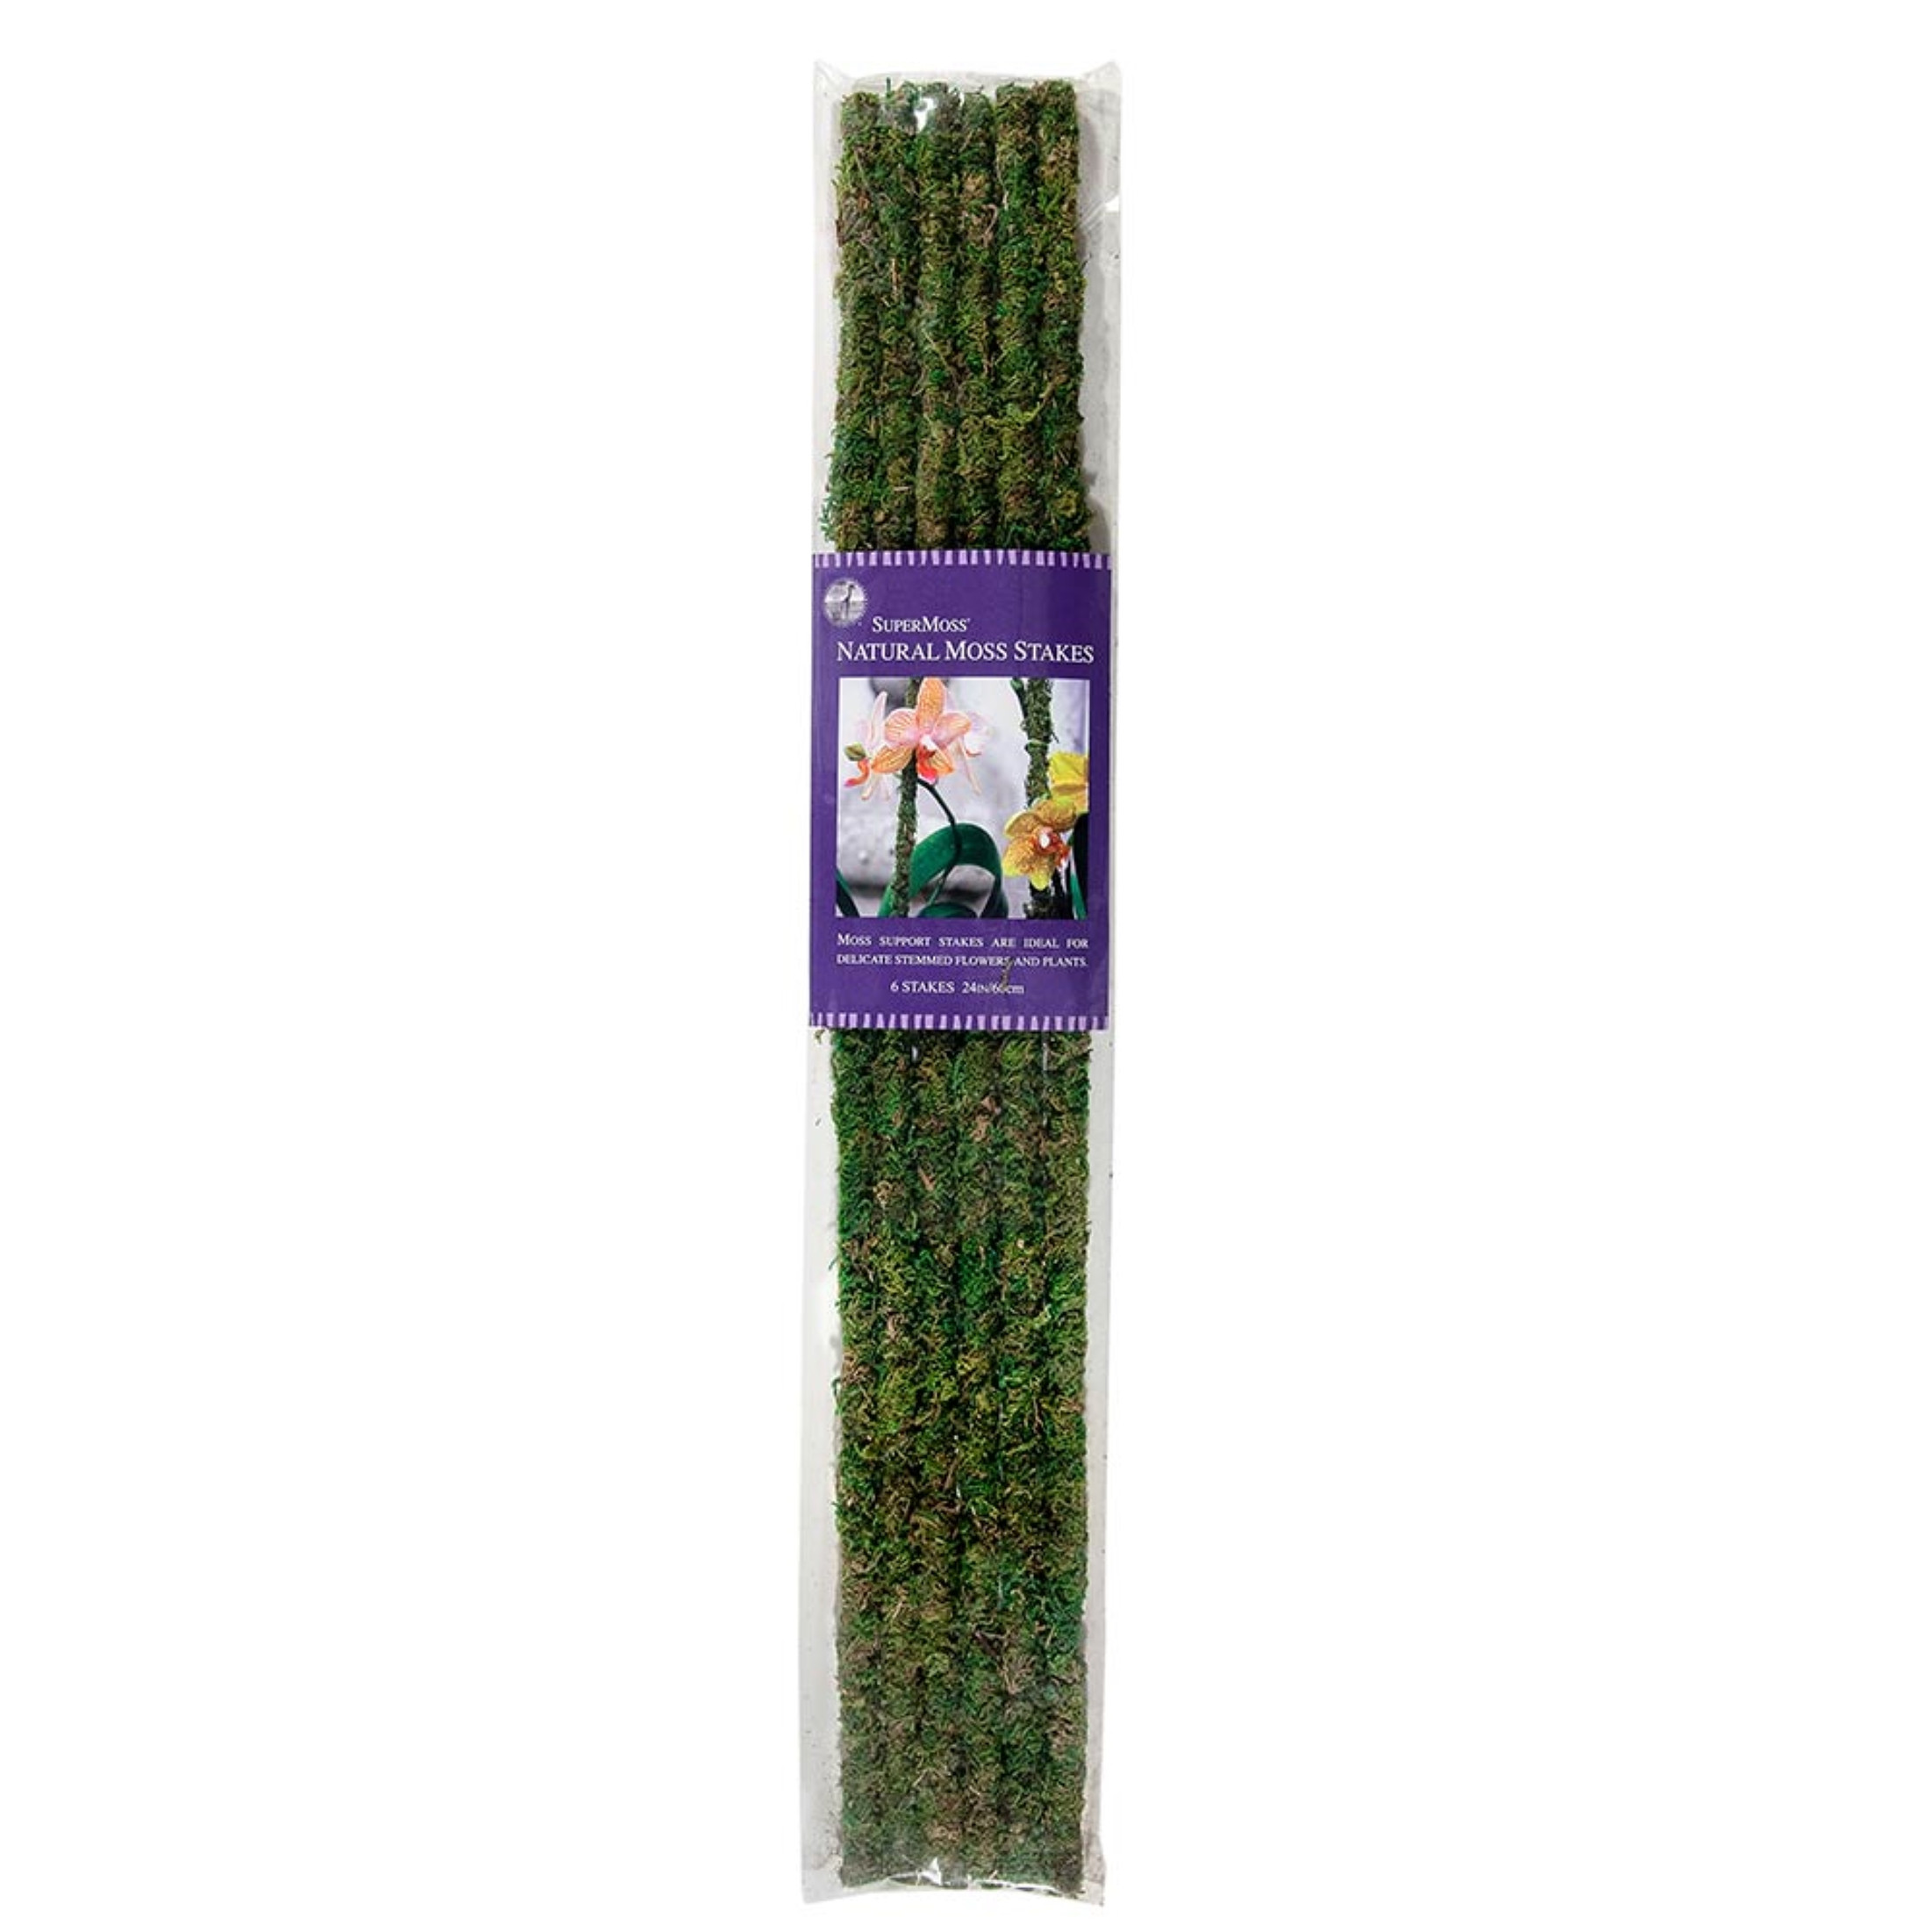 SuperMoss Moss Plant Stakes, Preserved, Fresh Green, 24" (Pack of 6)